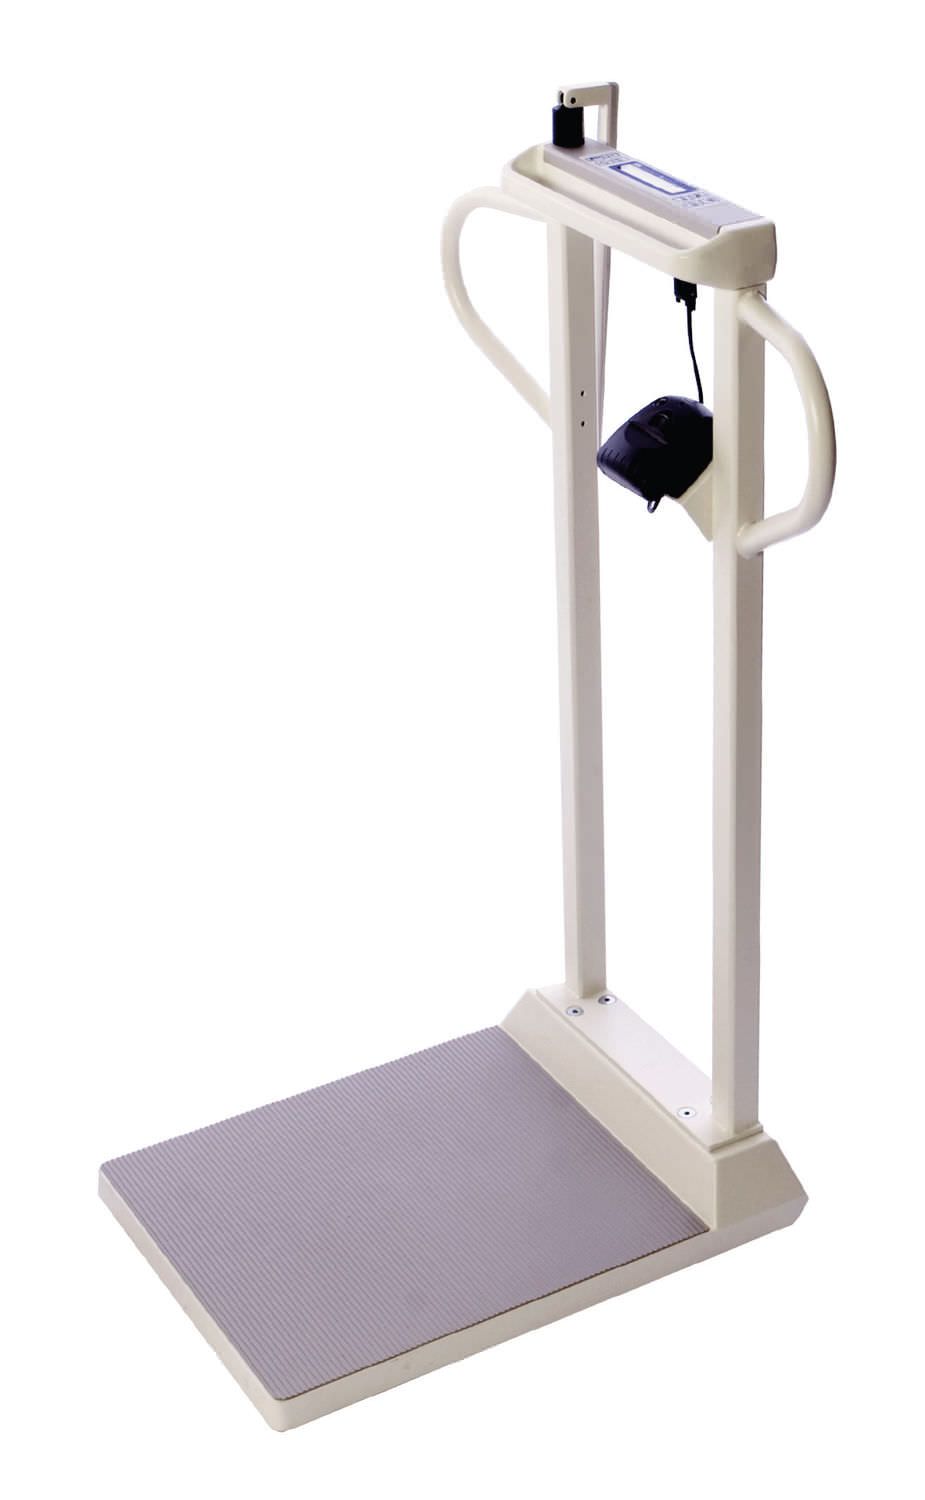 Digital Platform Scale with Extra Wide Handrails and Digital Height Rod